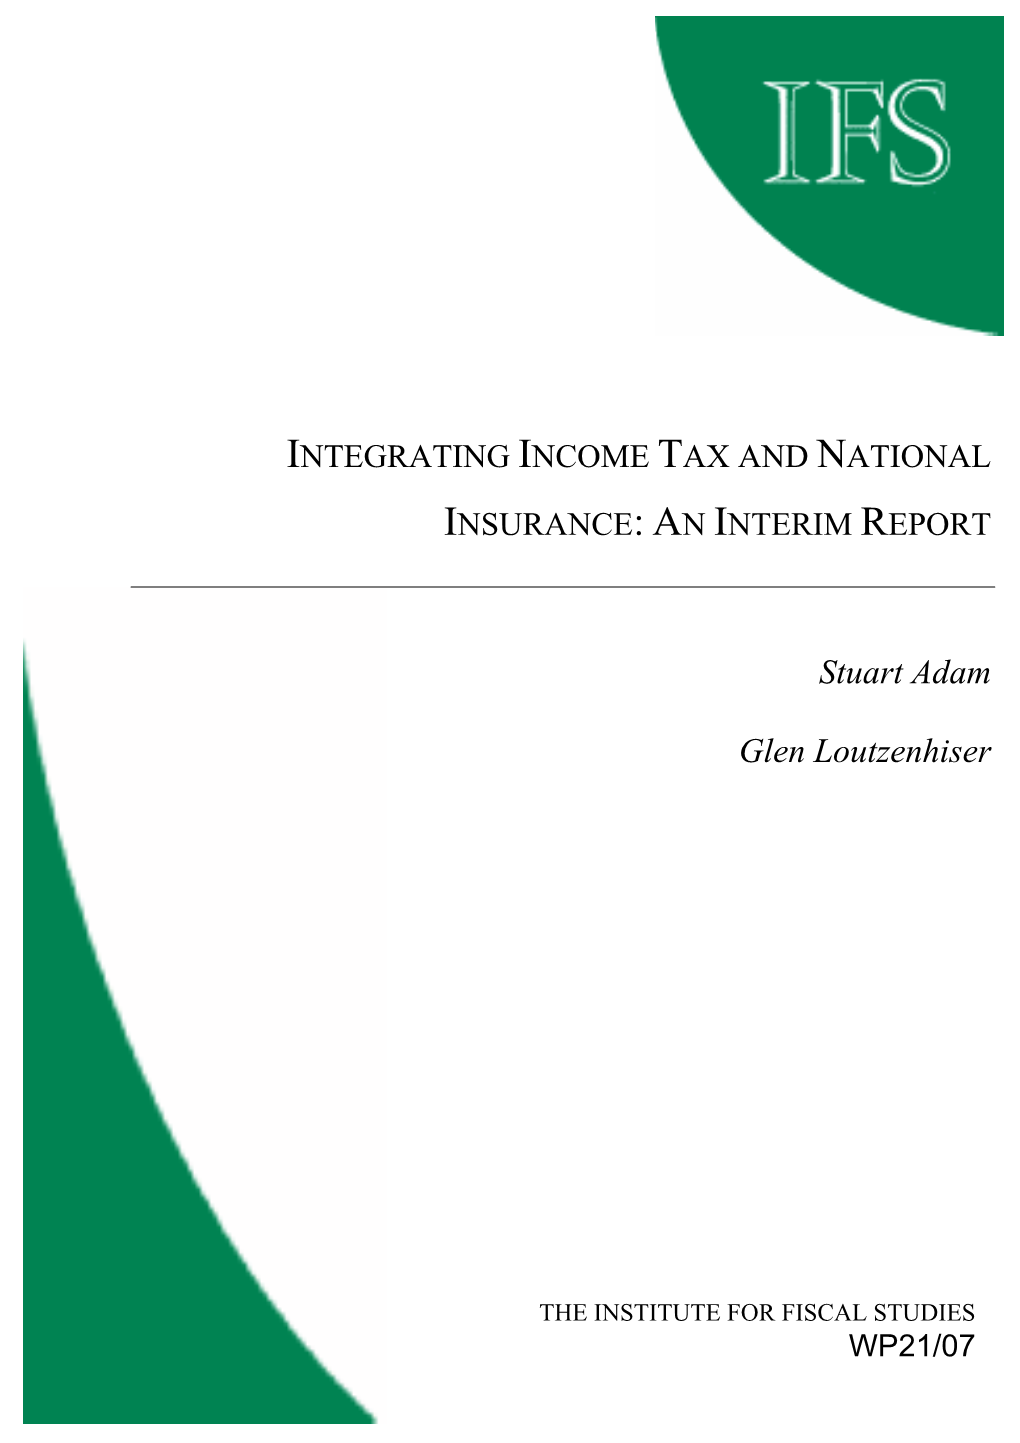 Integrating Income Tax and National Insurance: an Interim Report